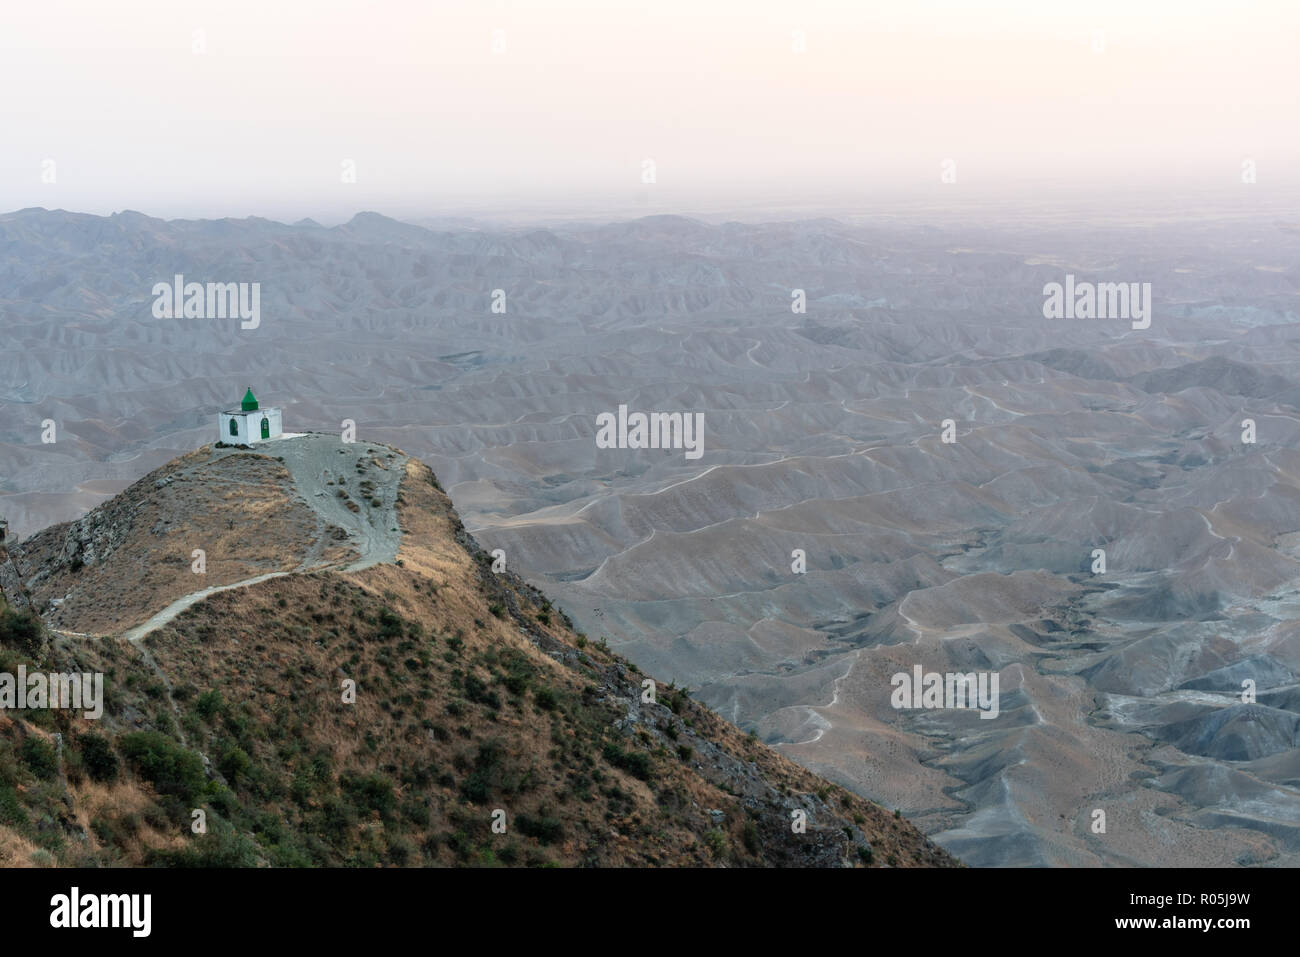 Tomb of Khaled Nabi, situated in the Gokcheh Dagh hills of the Turkmen Sahra in Golestan, Northern Iran Stock Photo